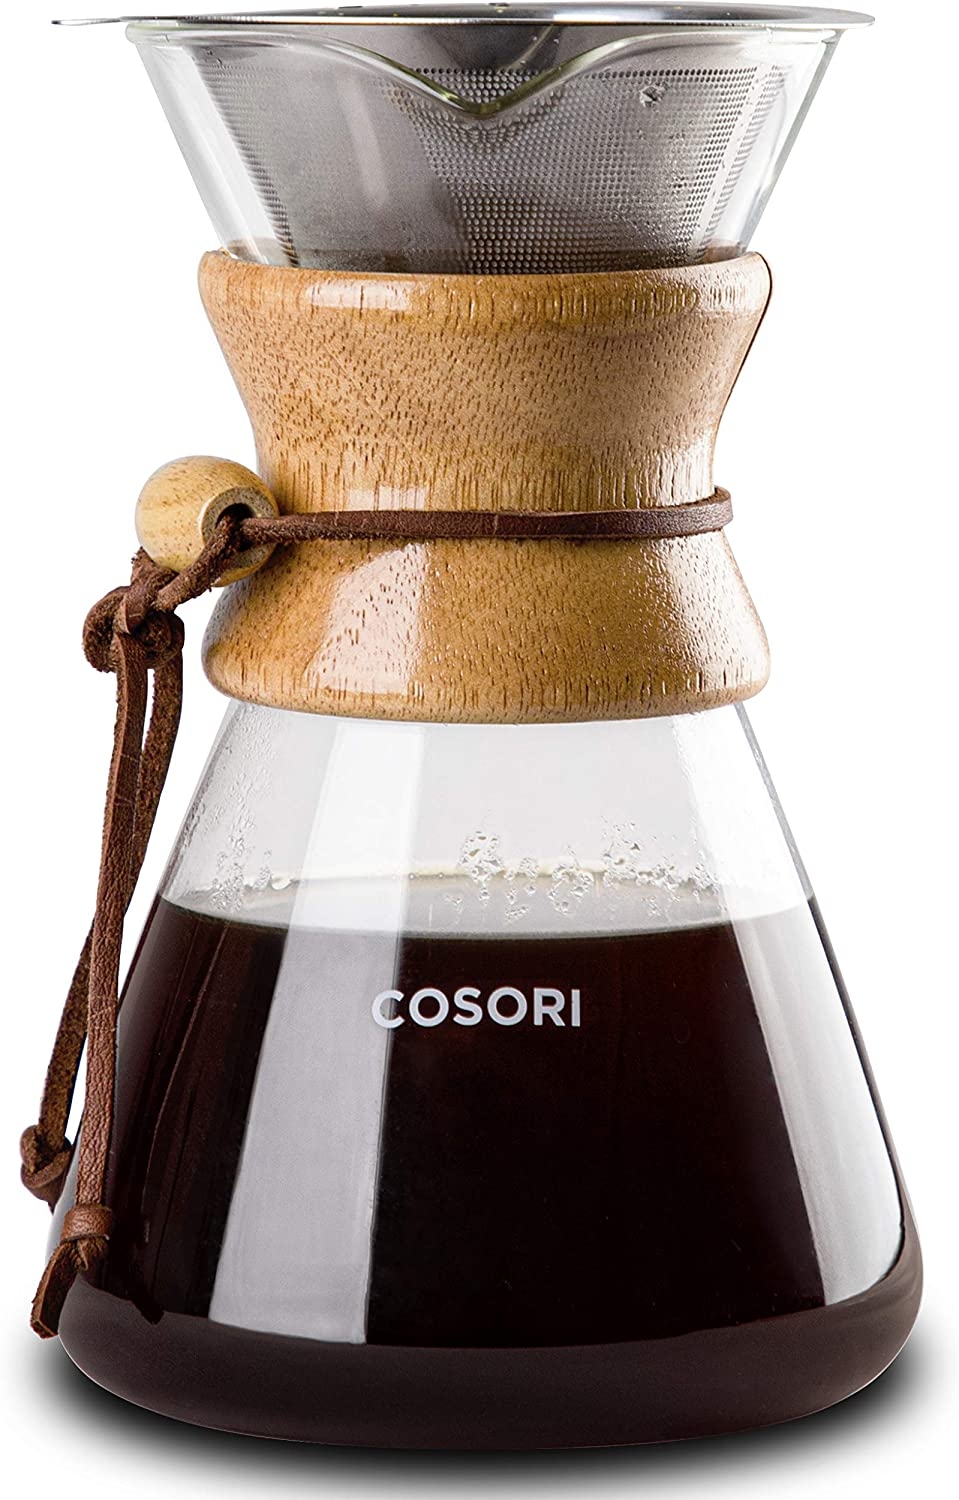 COSORI Pour Over Coffee Maker with Double-layer Stainless Steel Filter, 34 Ounce, Coffee Dripper Brewer & Glass Coffee Pot, High